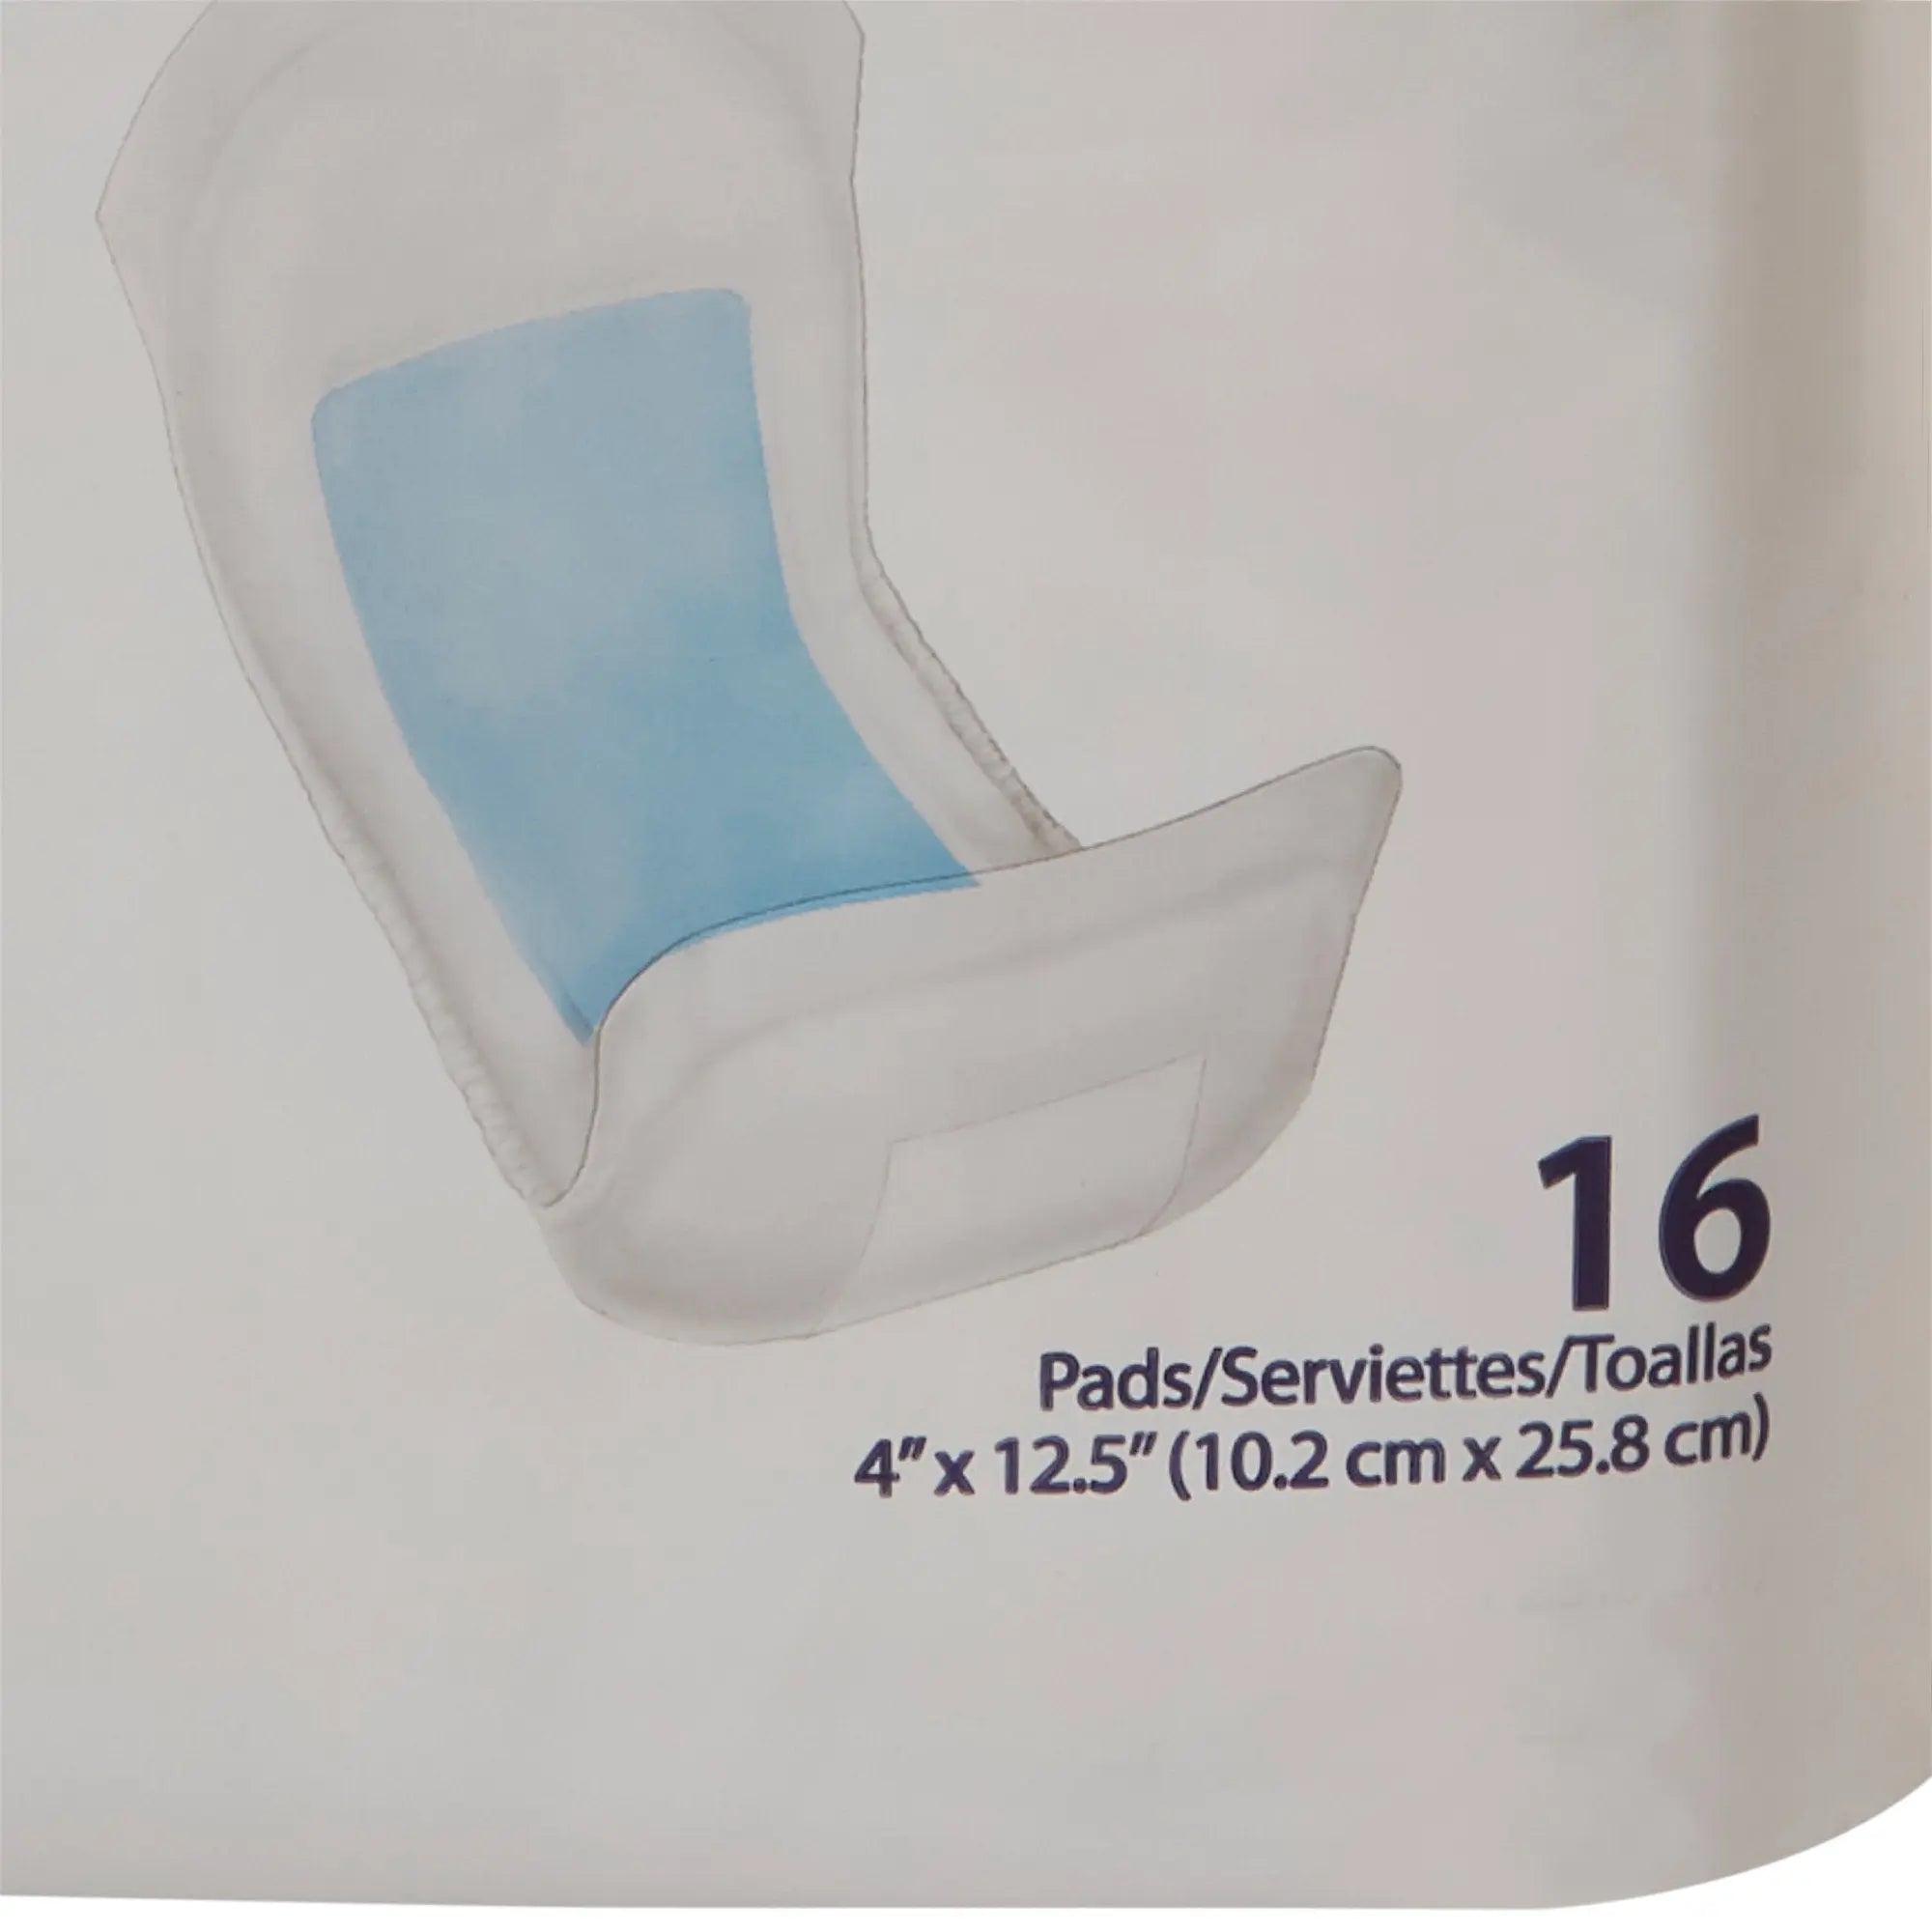 Sure Care Bladder Control Pads, Moderate Absorbency, 20 Count, 6